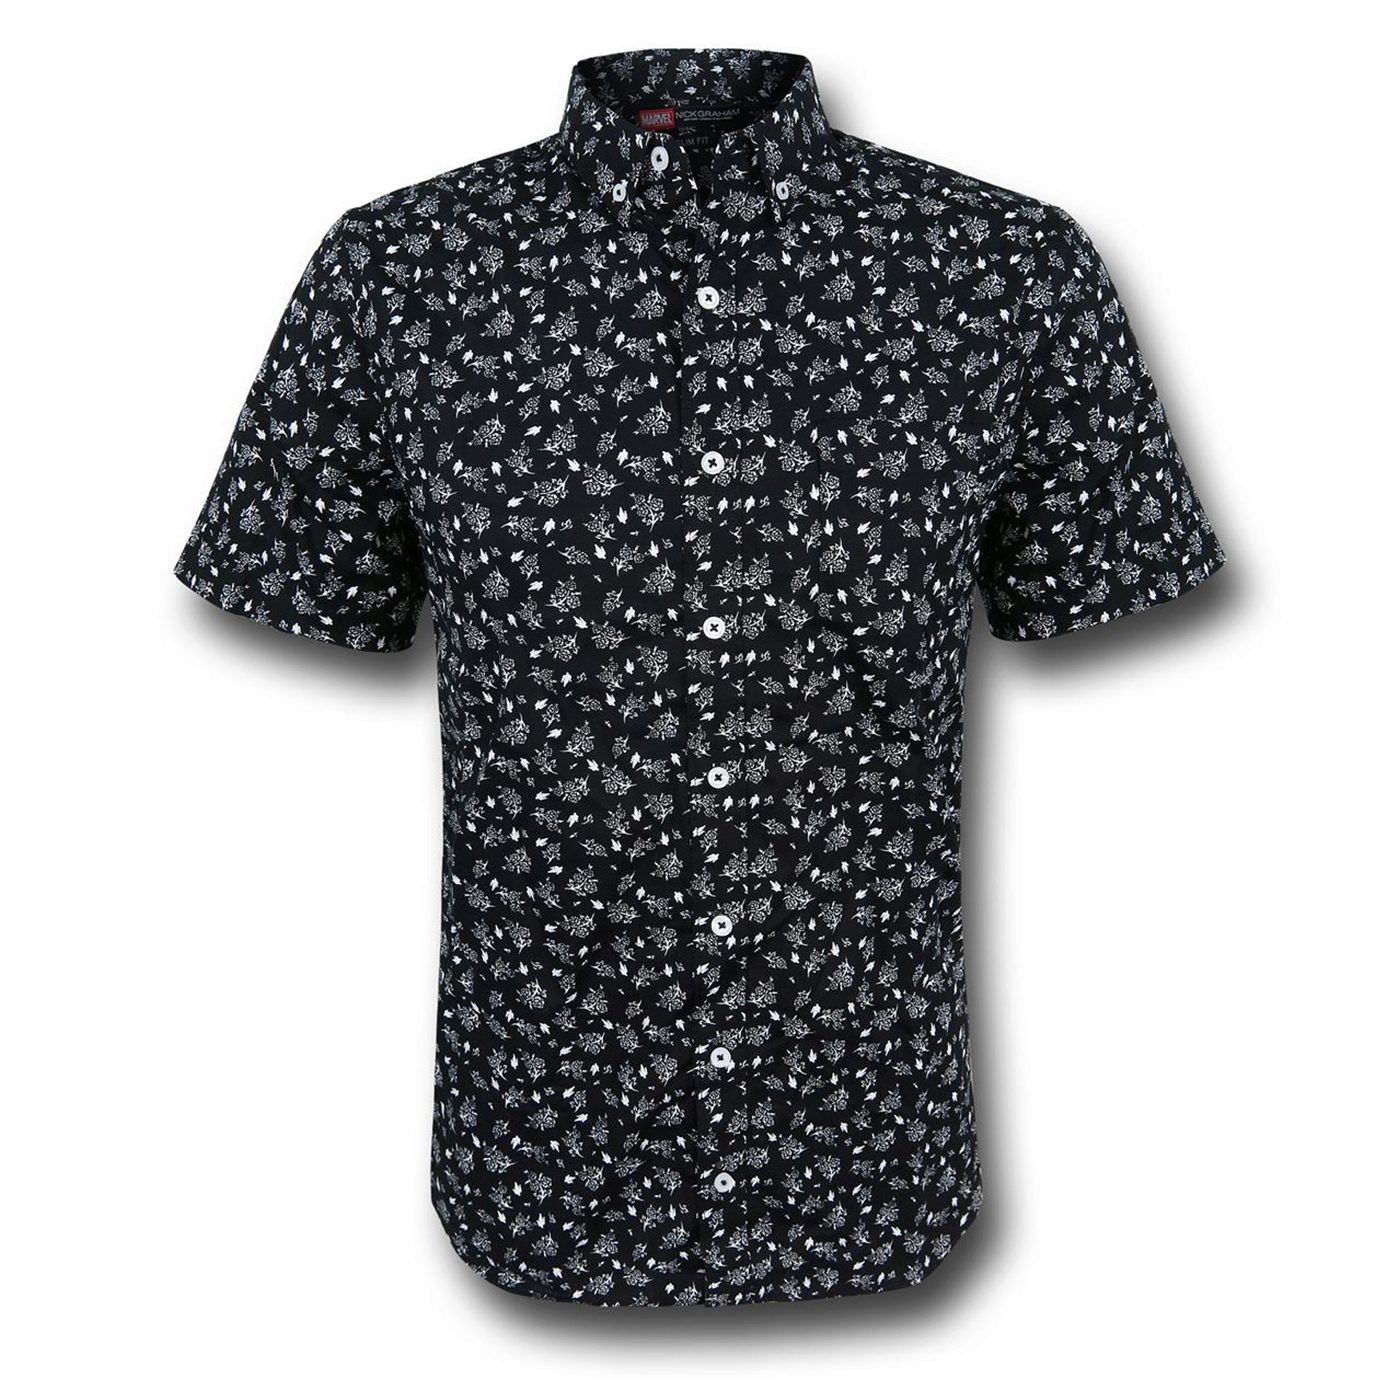 Iron Man Floral Men's Fitted Button Down Shirt